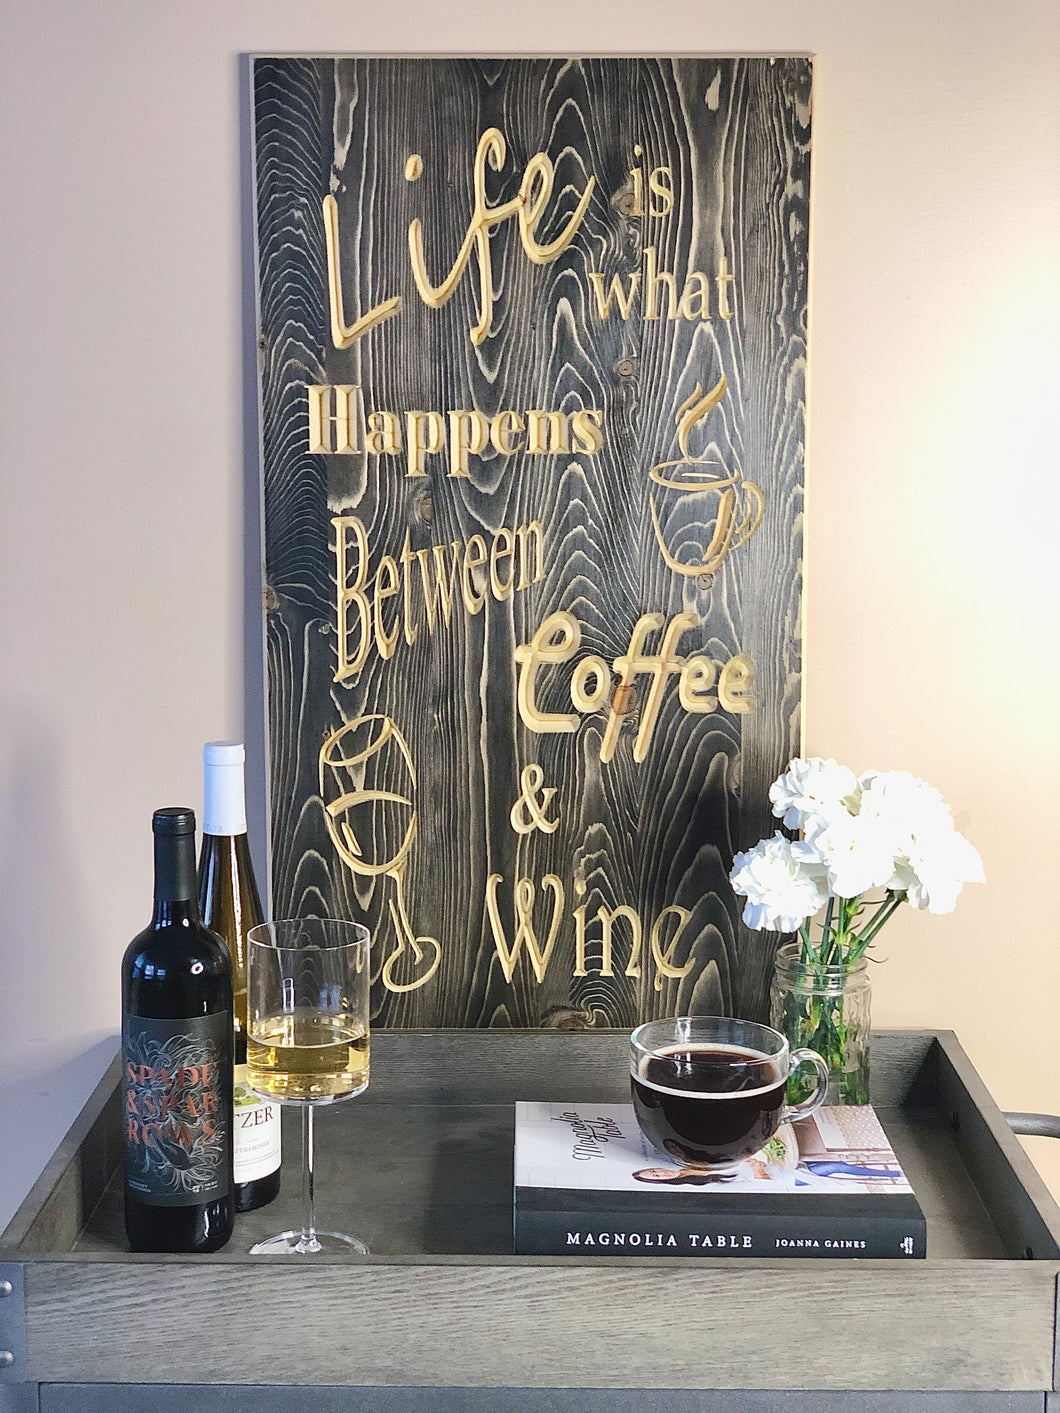 The Coffee + Wine Sign